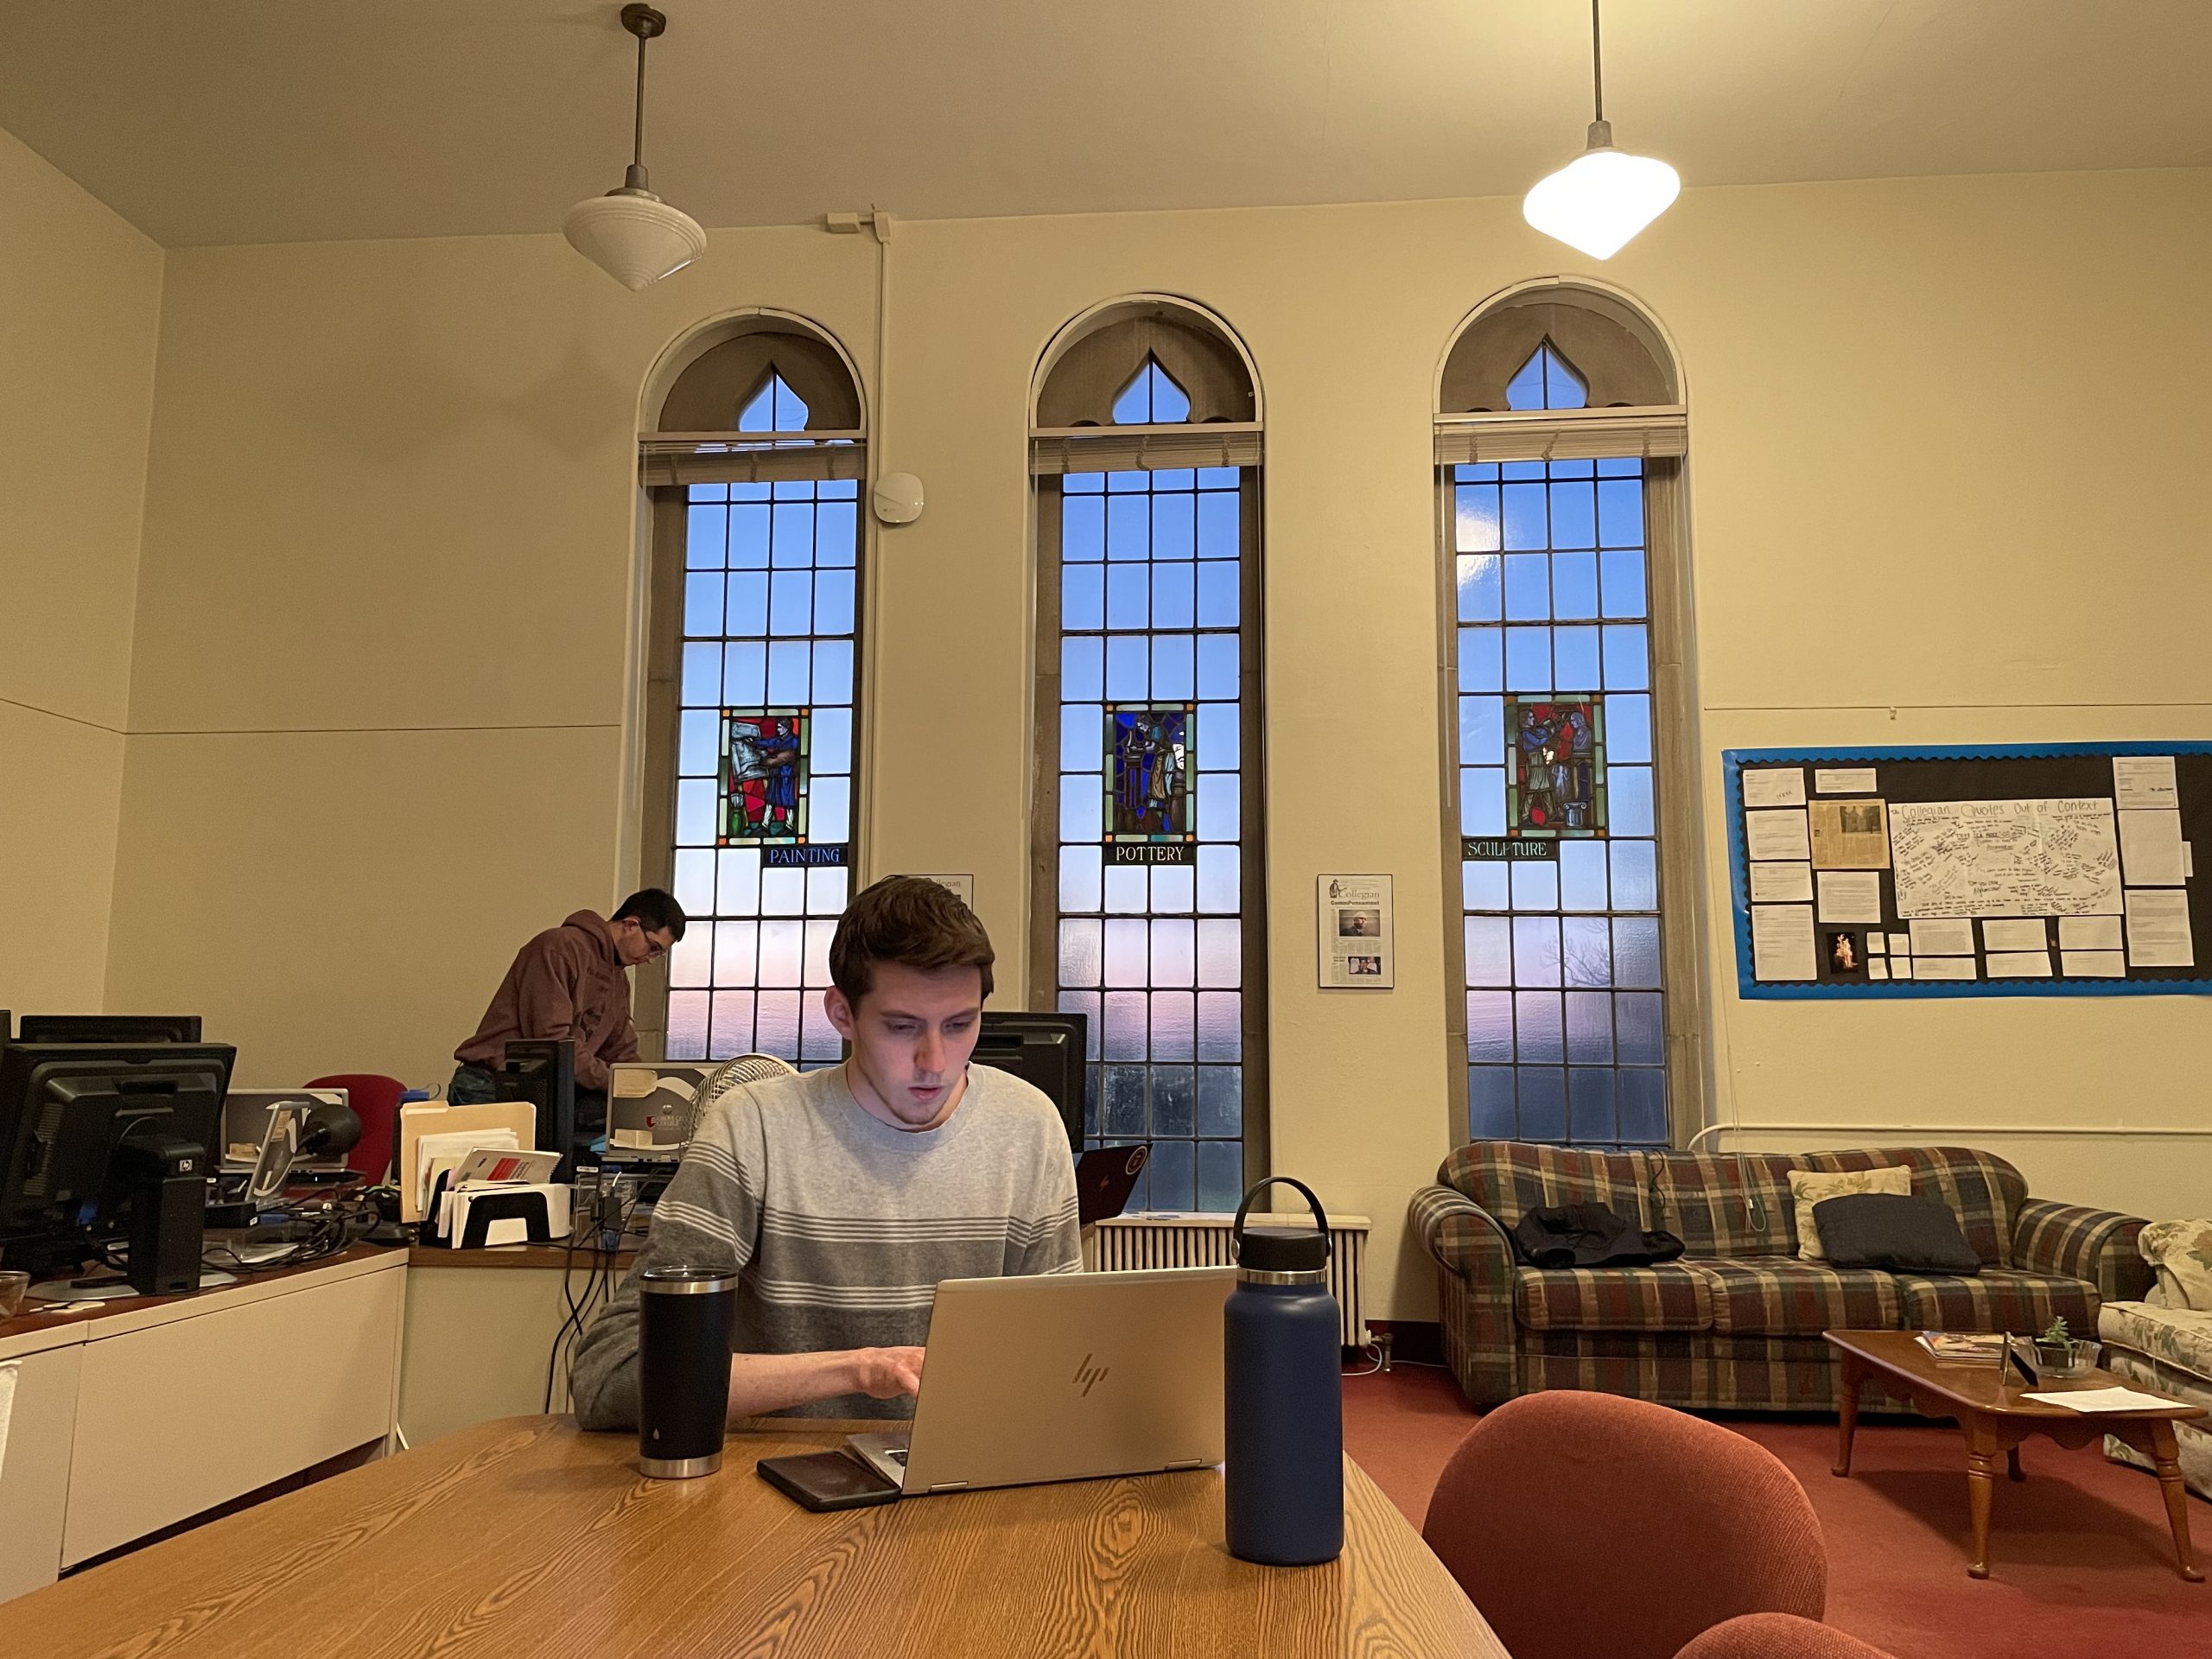 Collegian Editor-in-Chief David Zimmermann works on his weekly “From the Tower” column, completely oblivious to the setting sun’s illumination of the stained glass windows in the newspaper’s office in the tower of Crawford Hall, a gothic structure erected in 1938. The office was originally an art studio and the windows depict painting, pottery and sculpture.